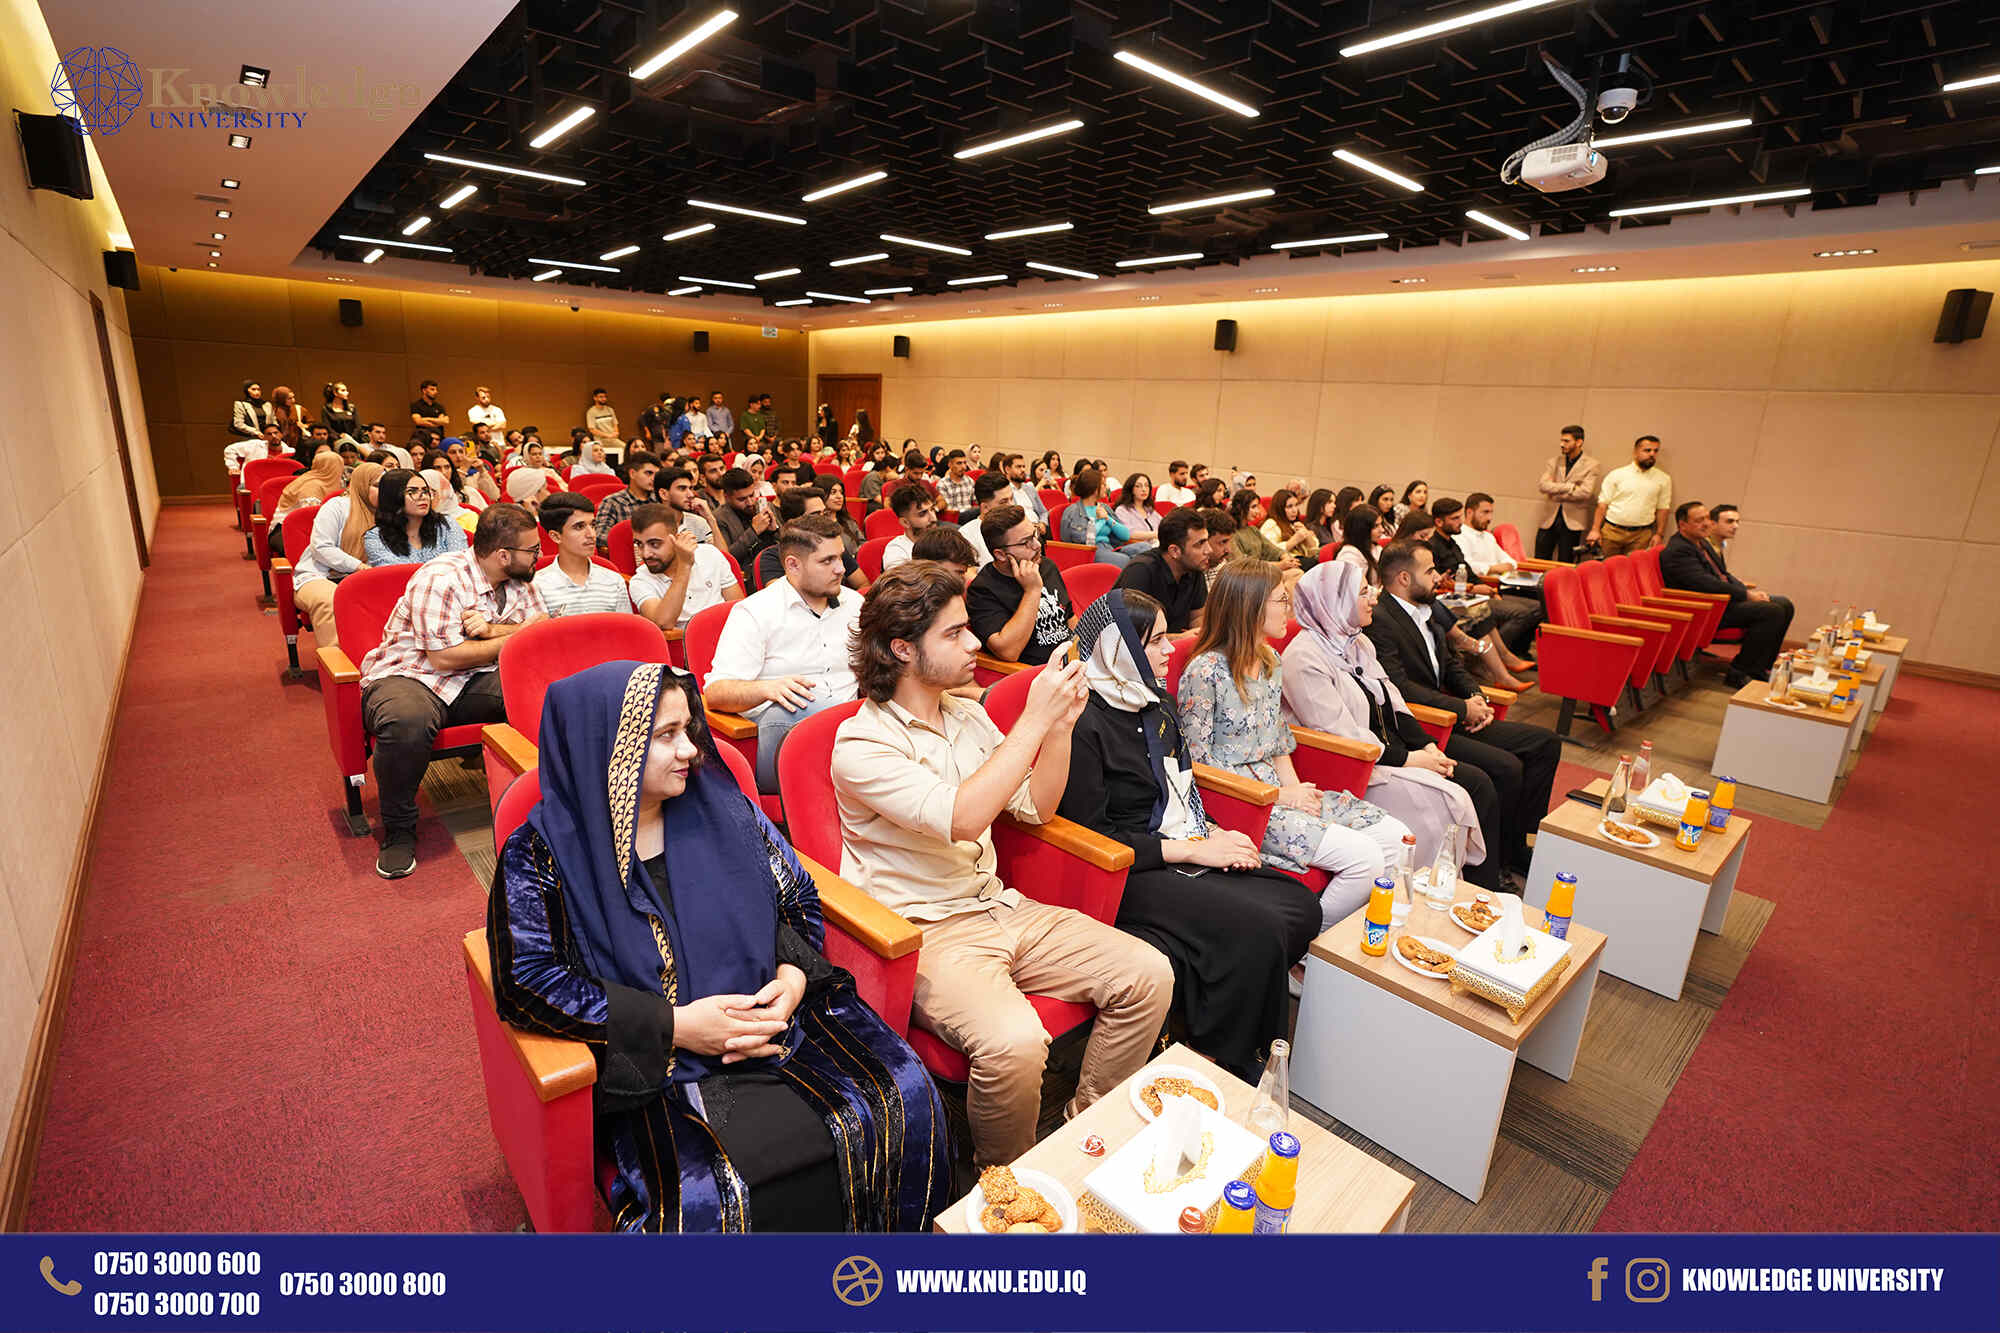 Book Launch Ceremony at Knowledge University Showcases Remarkable Achievements>